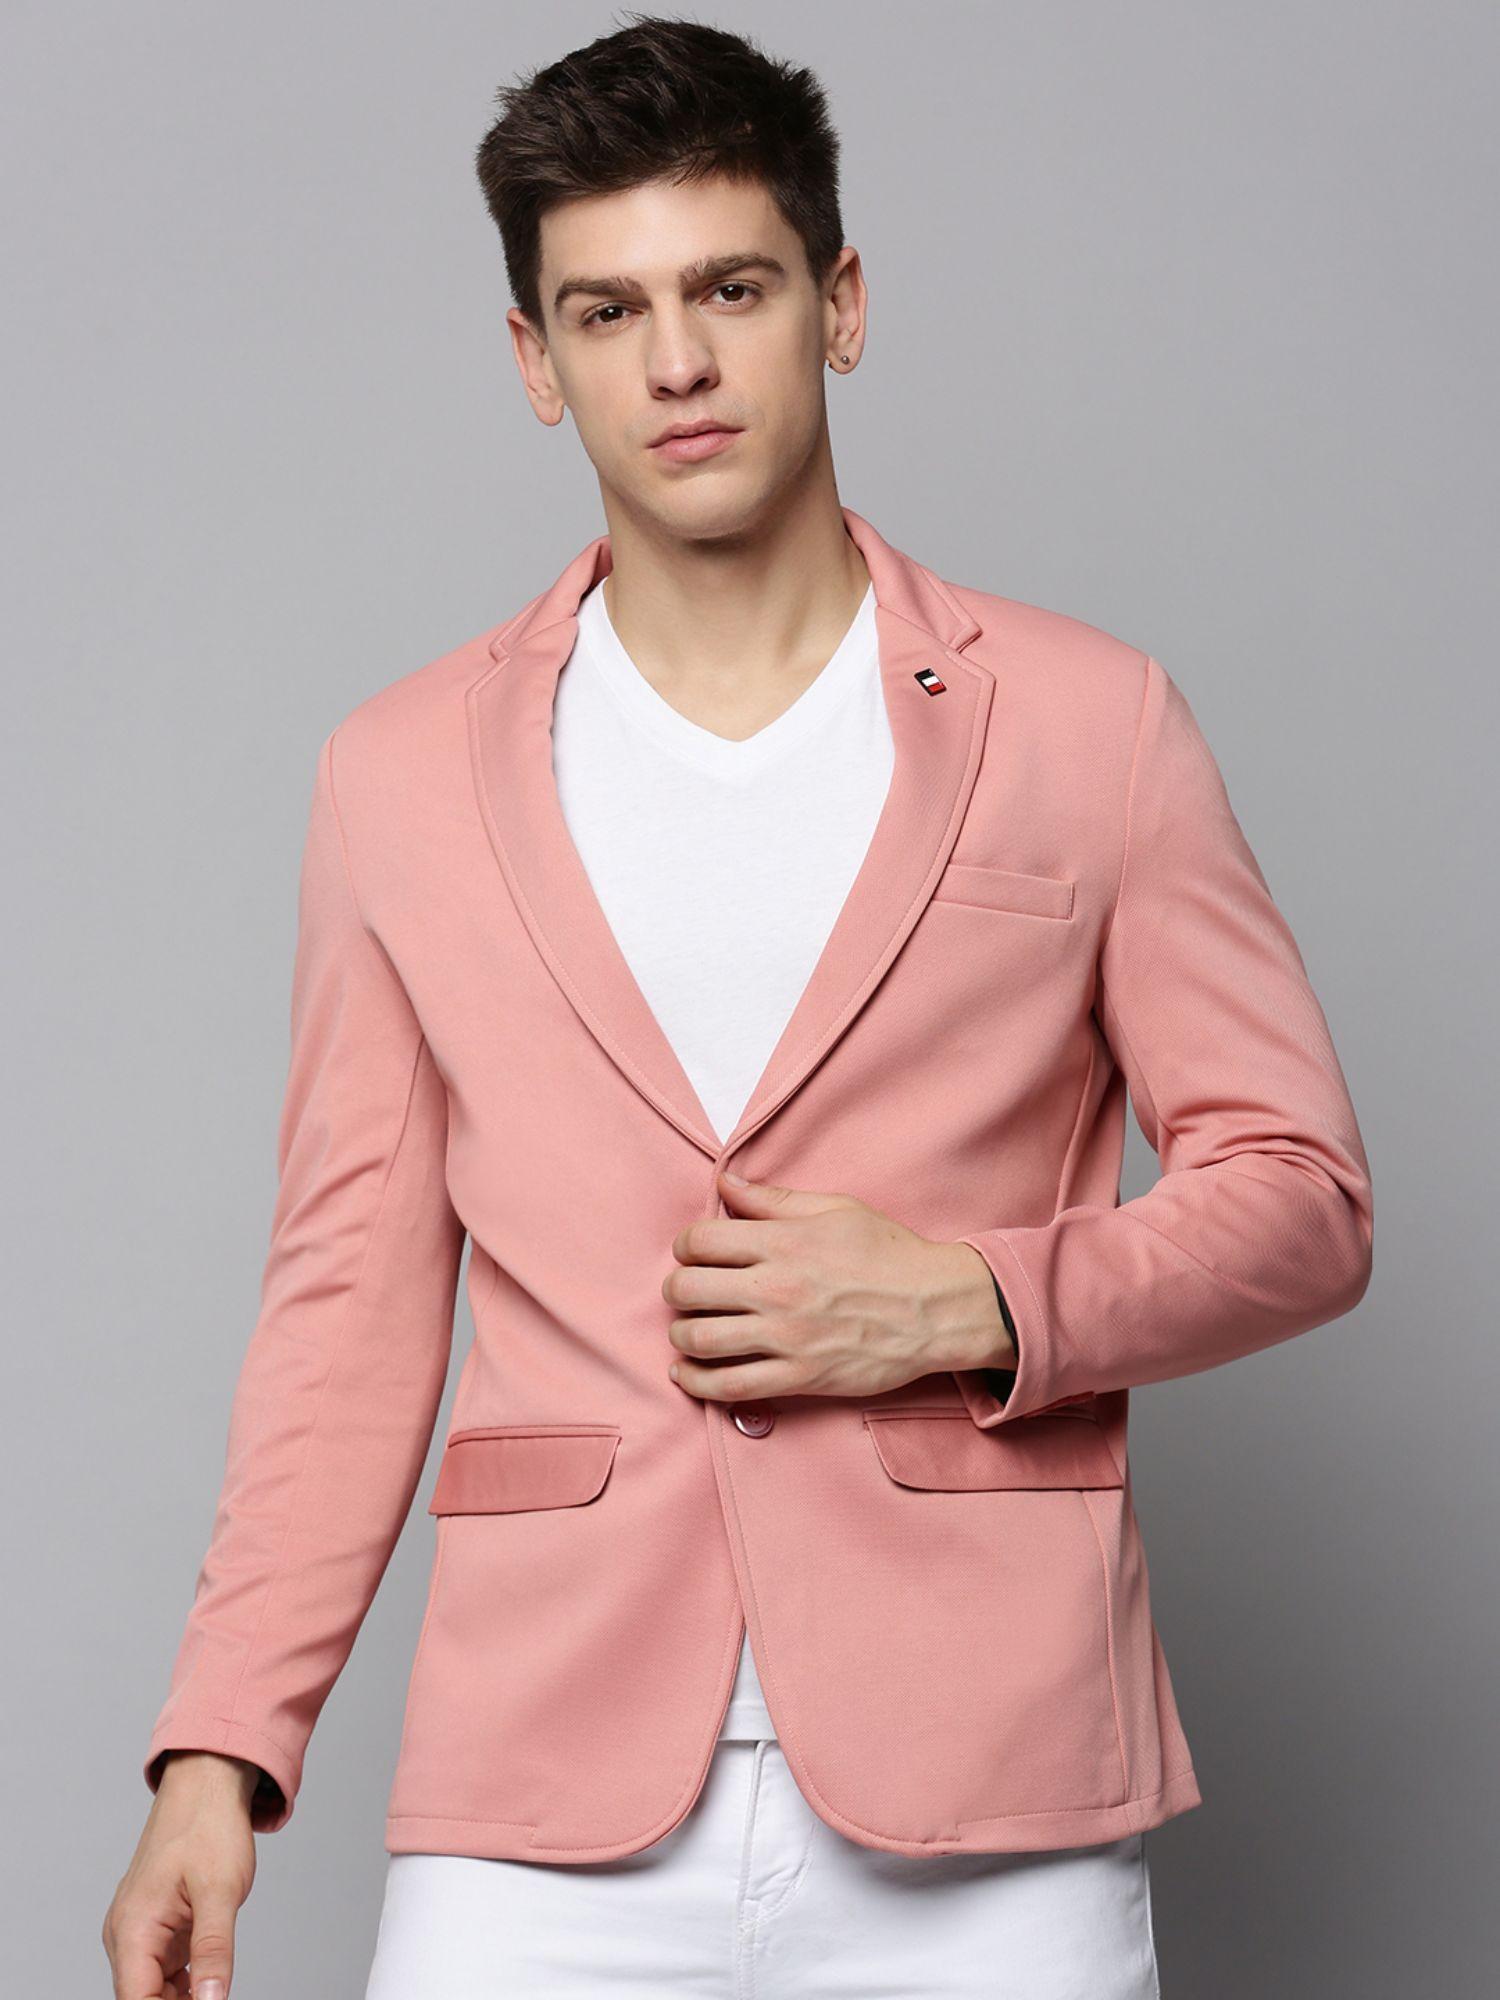 mens-notched-lapel-solid-pink-open-front-blazer